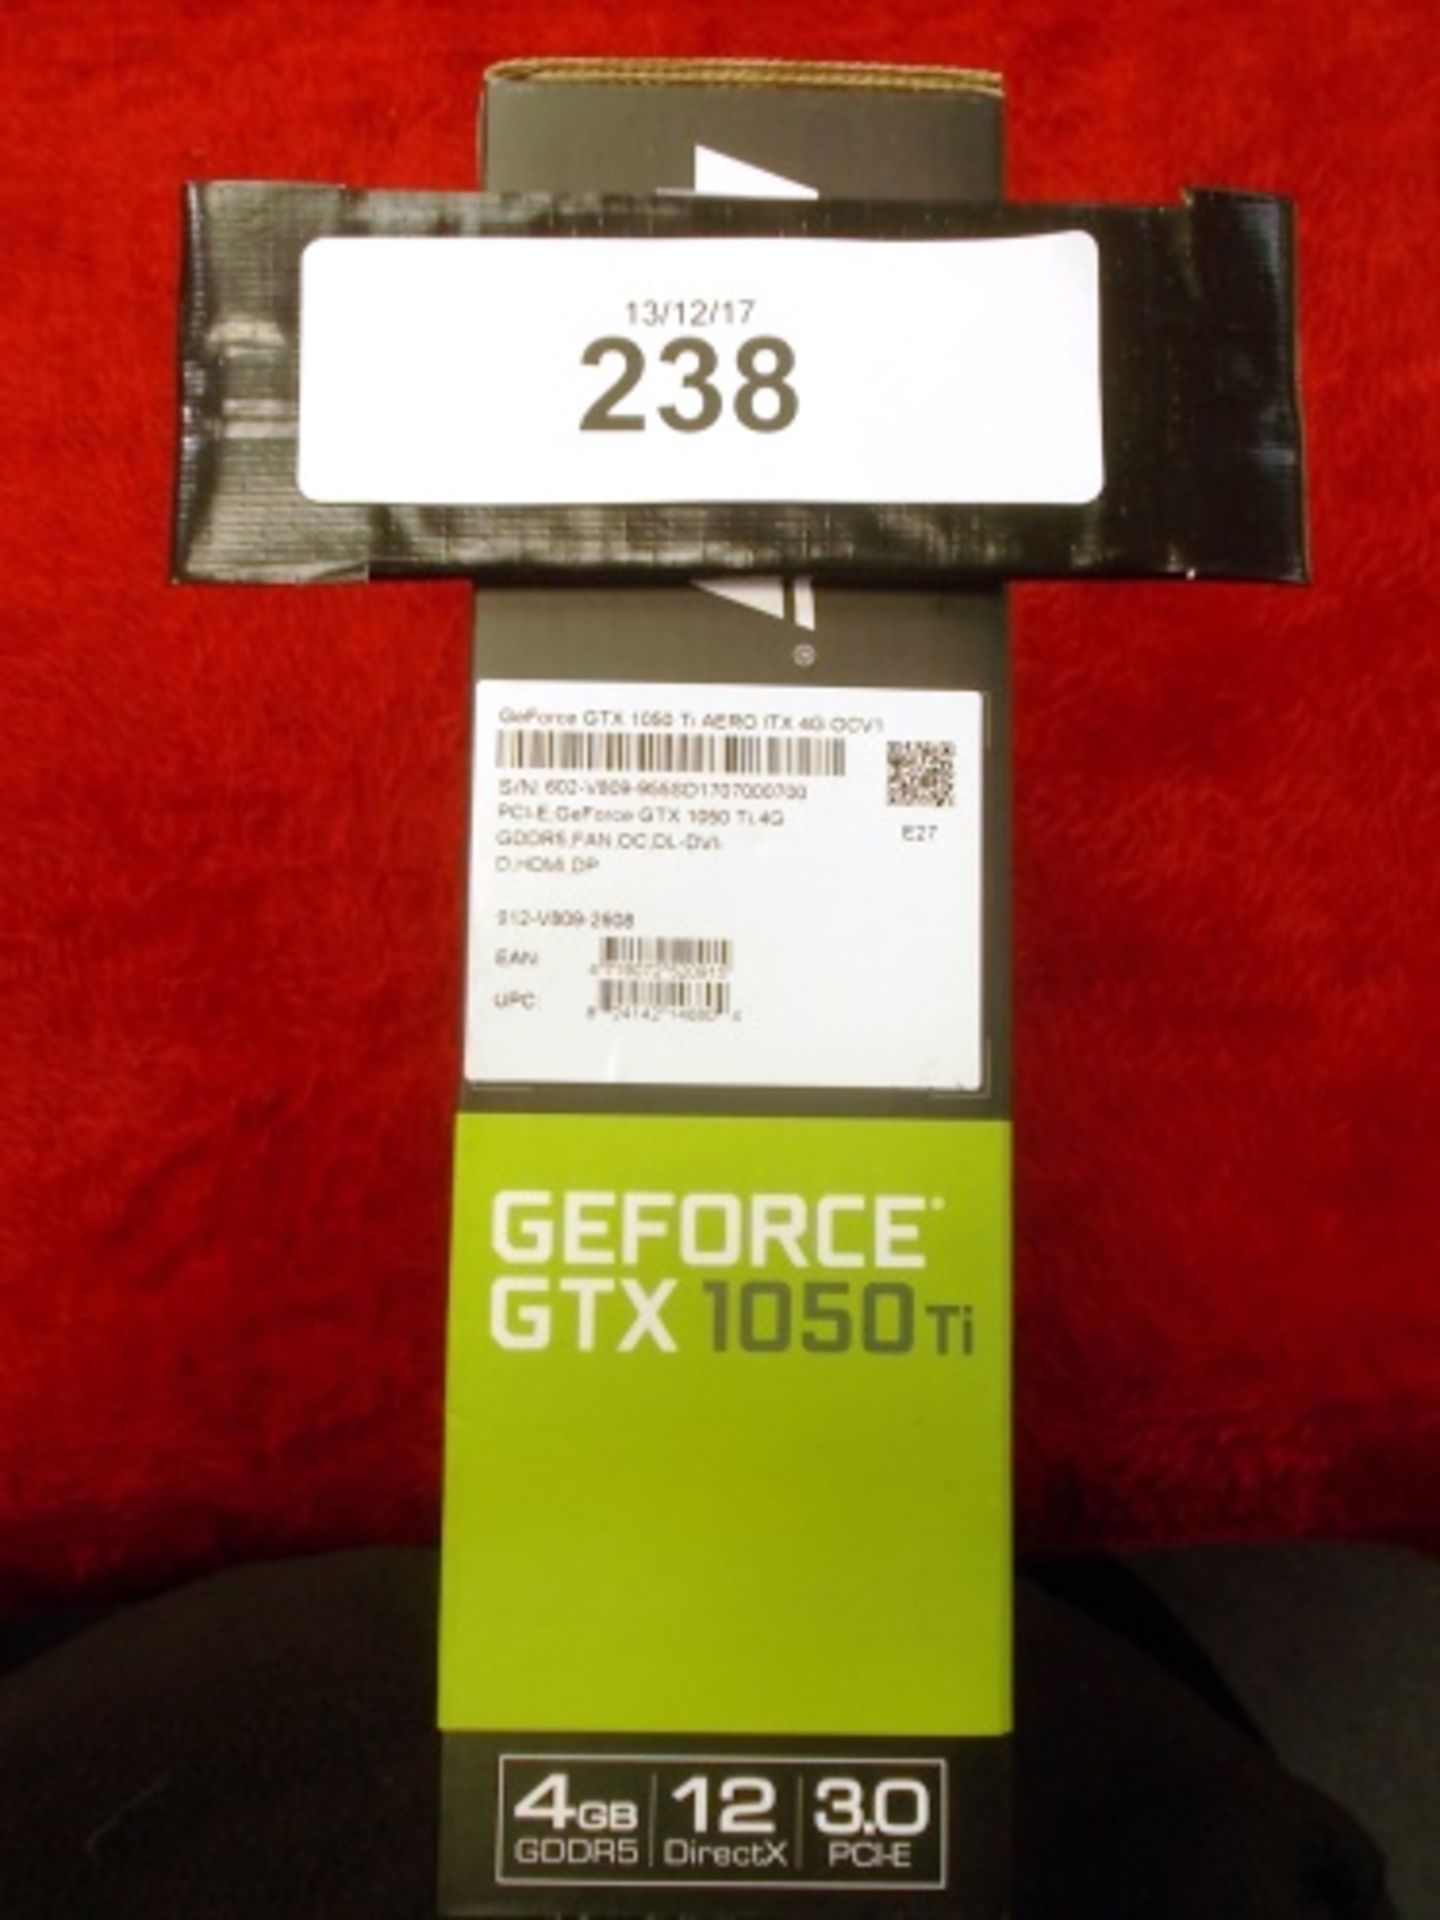 An MSI GeForce GTX 1050Ti graphics card, model 912-V809-2608, RRP £130.00 - New in box (C2)